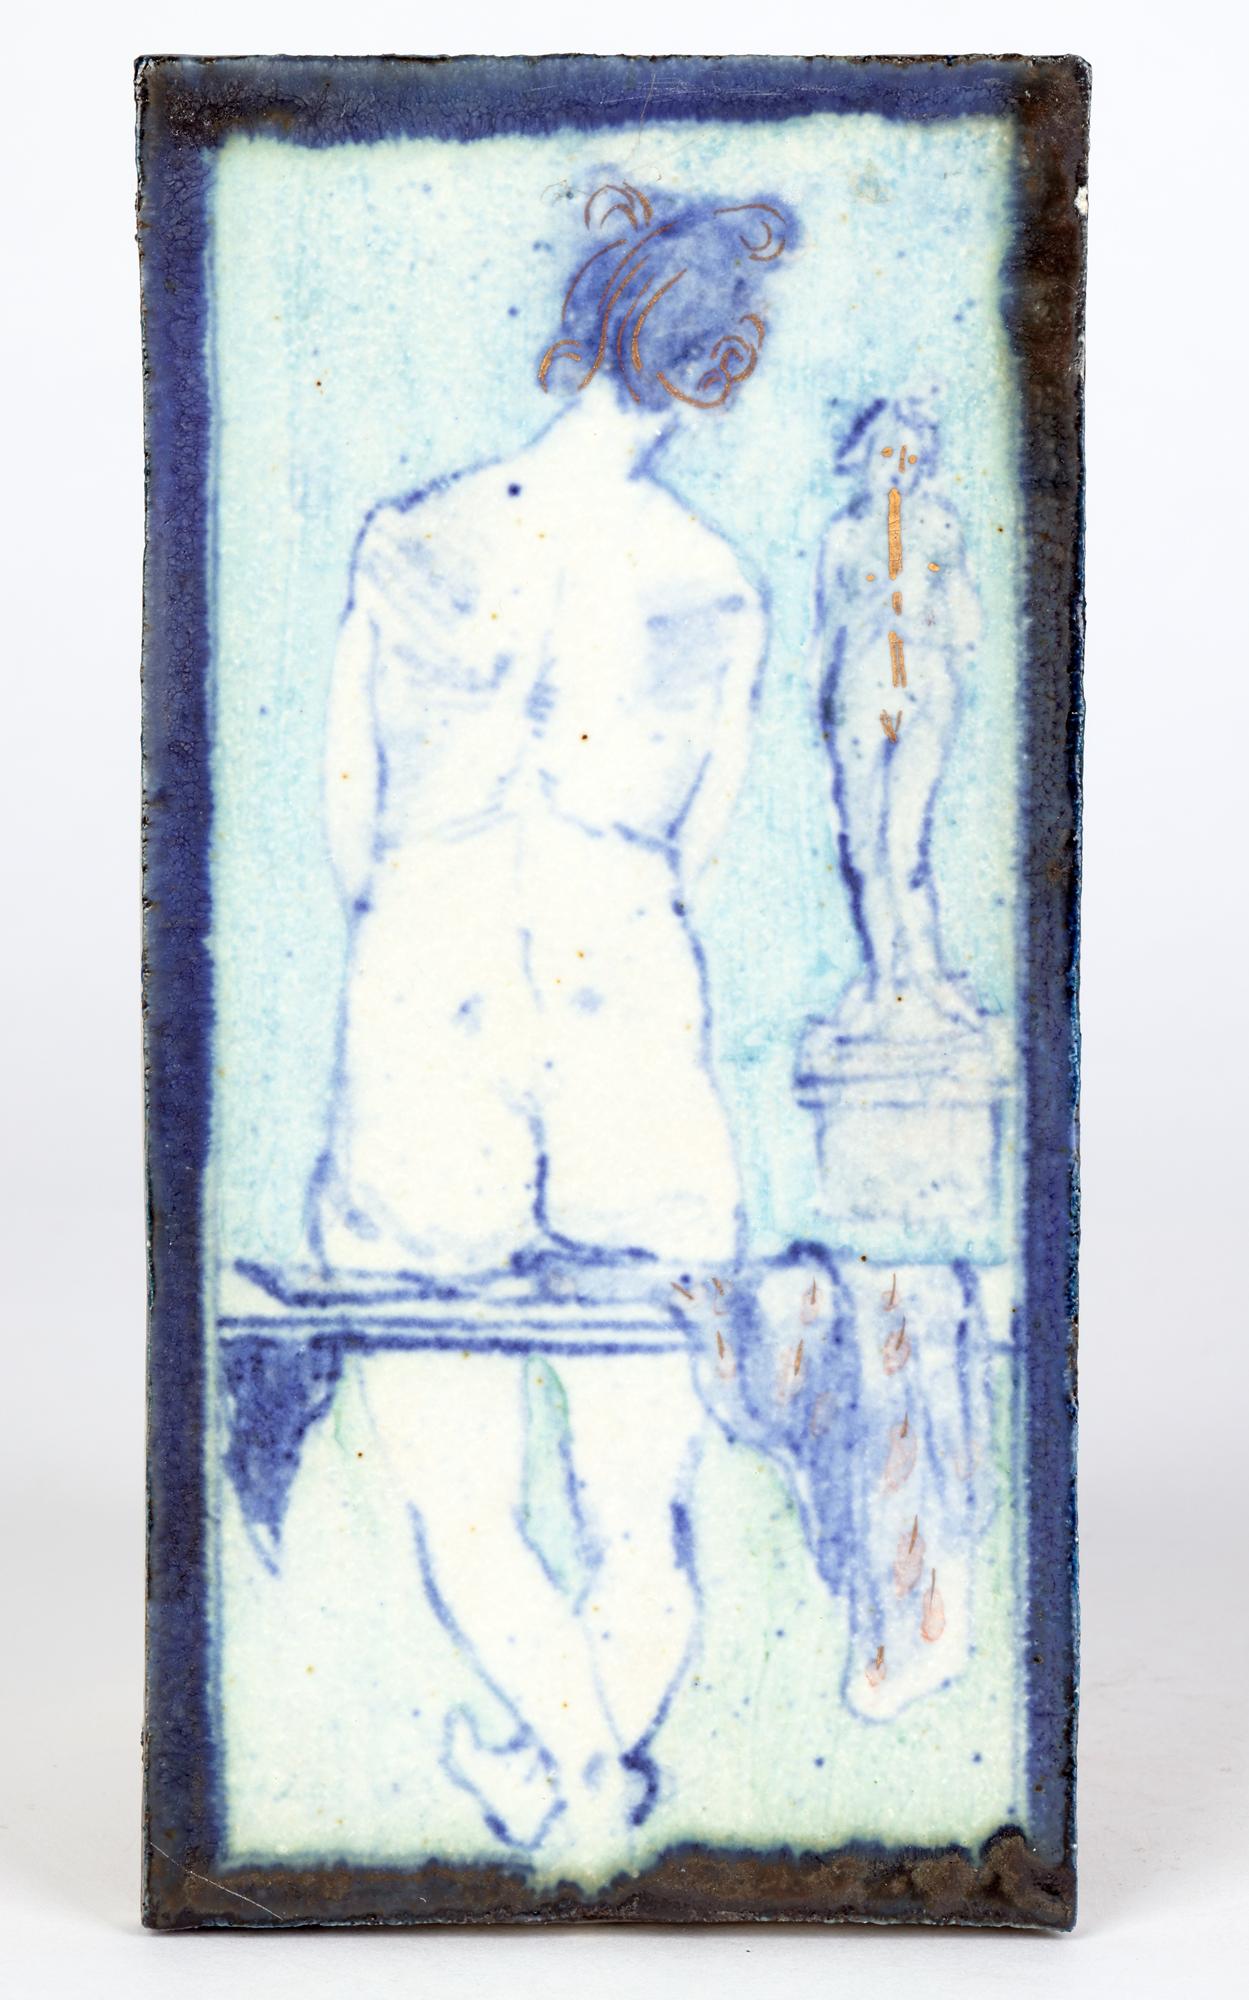 Stoneware Eric James Mellon Studio Pottery Tile Hand-Painted Titled Maiden with a Statue